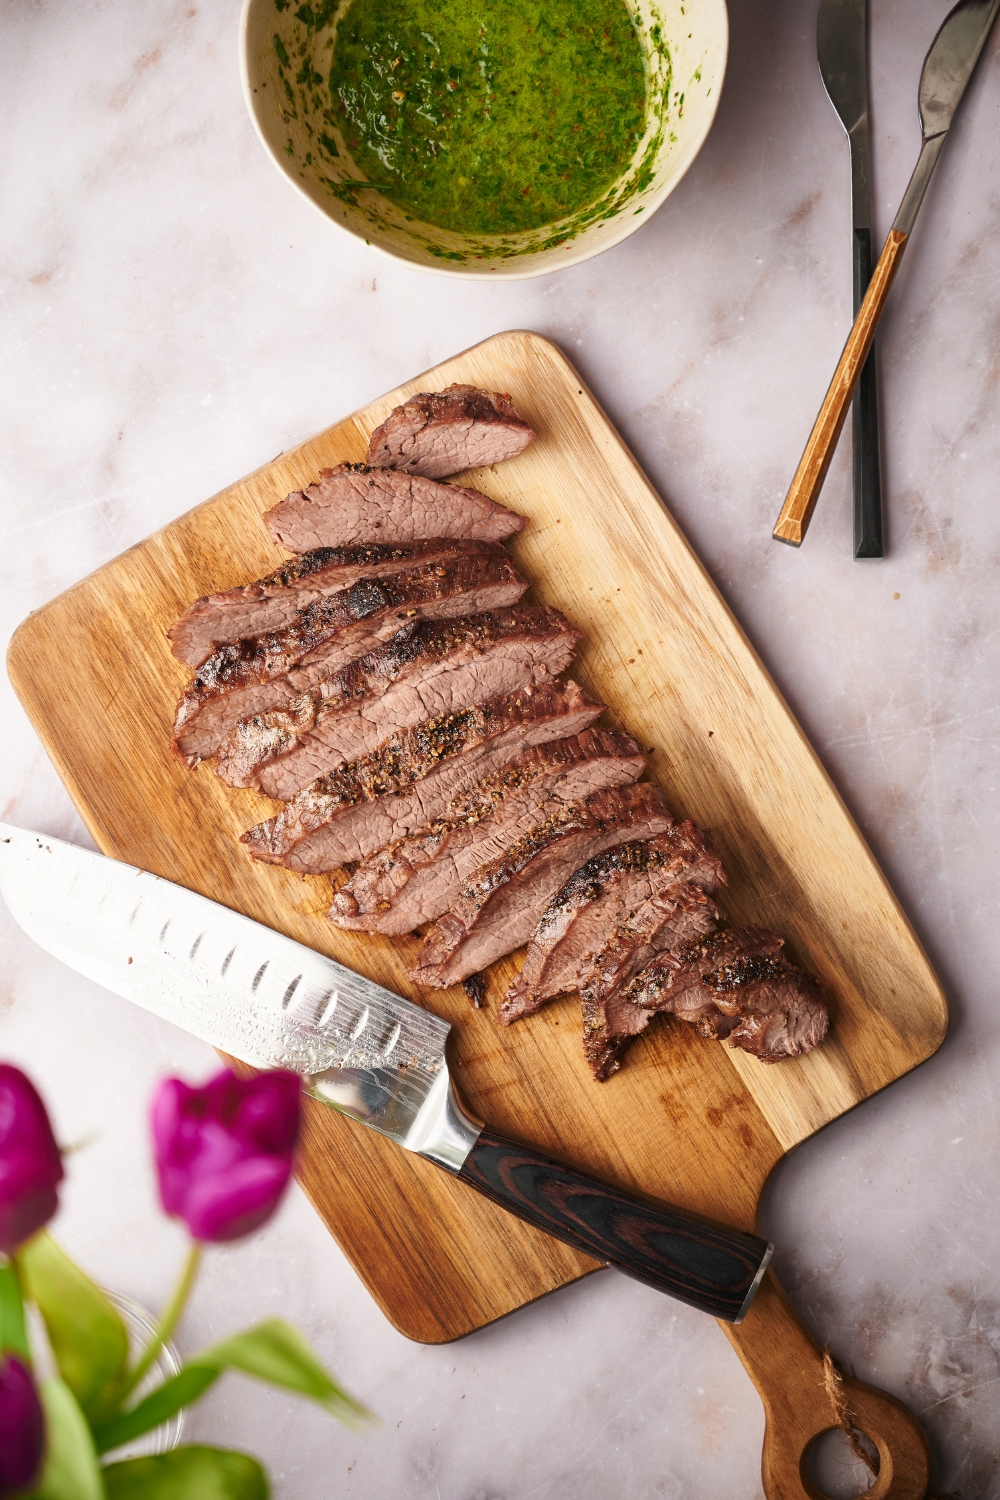 A cooked tri-tip steak that has been sliced into equal-sized thin slices. The steak is on a wooden board and there is a knife on the board along with a bowl of chimichurri sauce next to it.